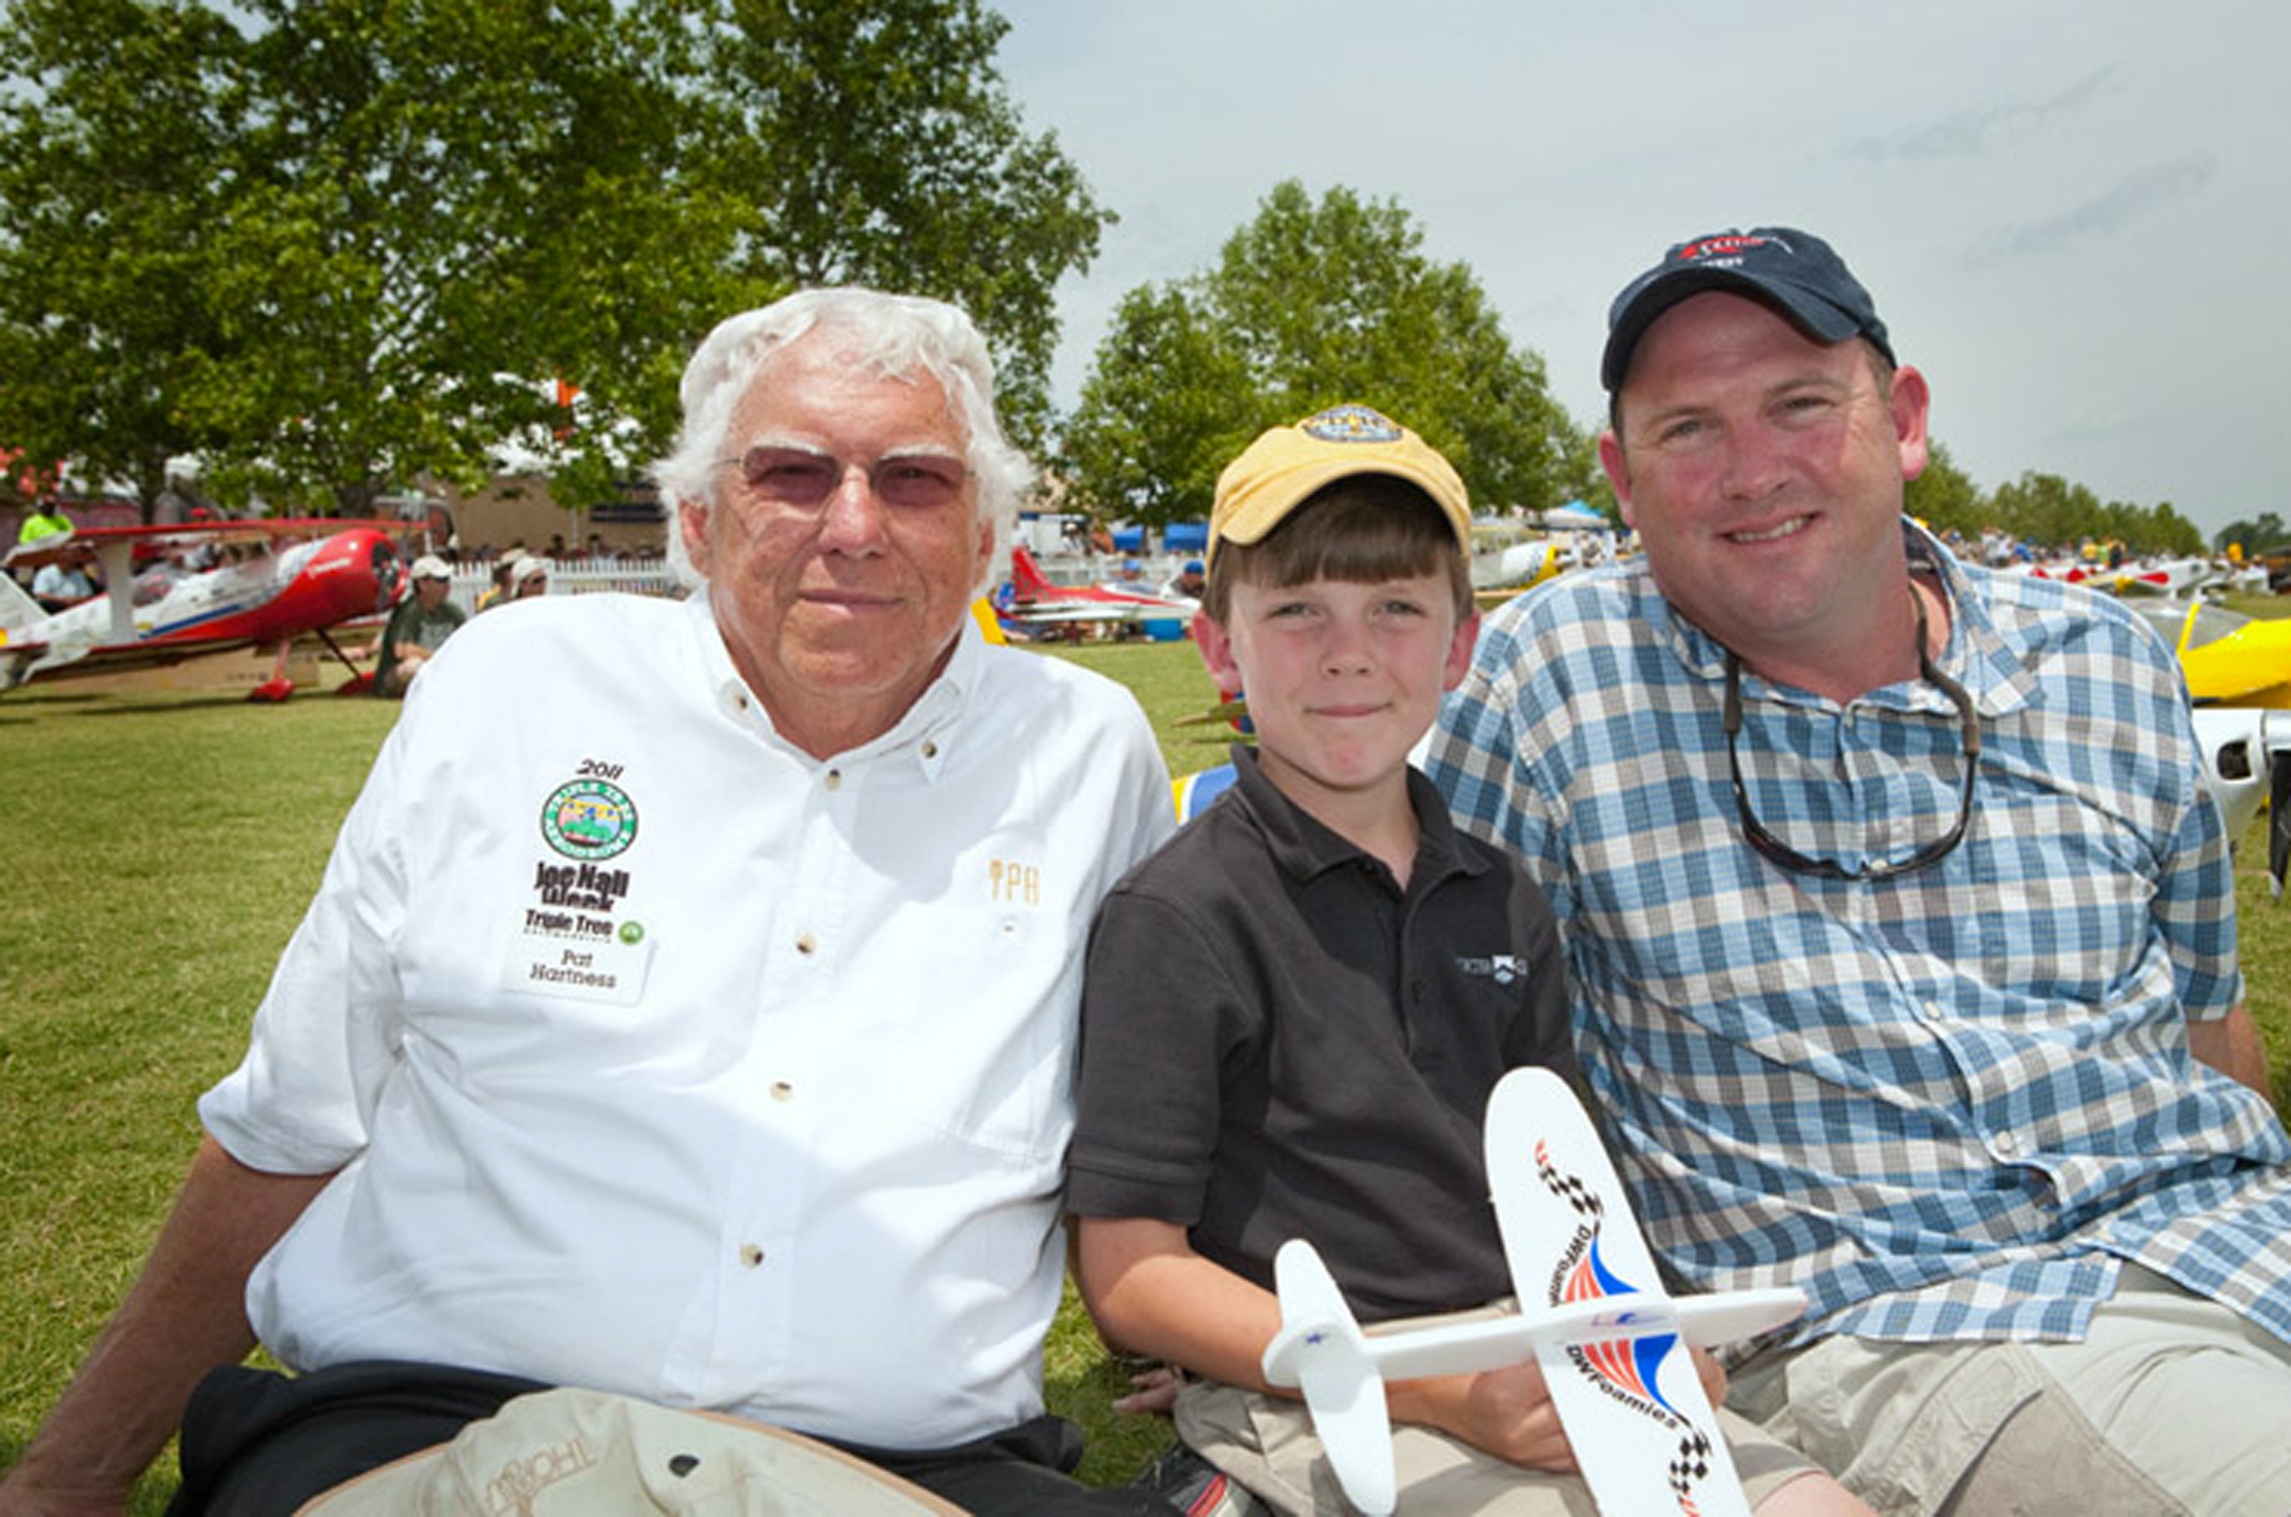 Pat is enjoying his favorite place with two of his favorite people—his son and grandson.